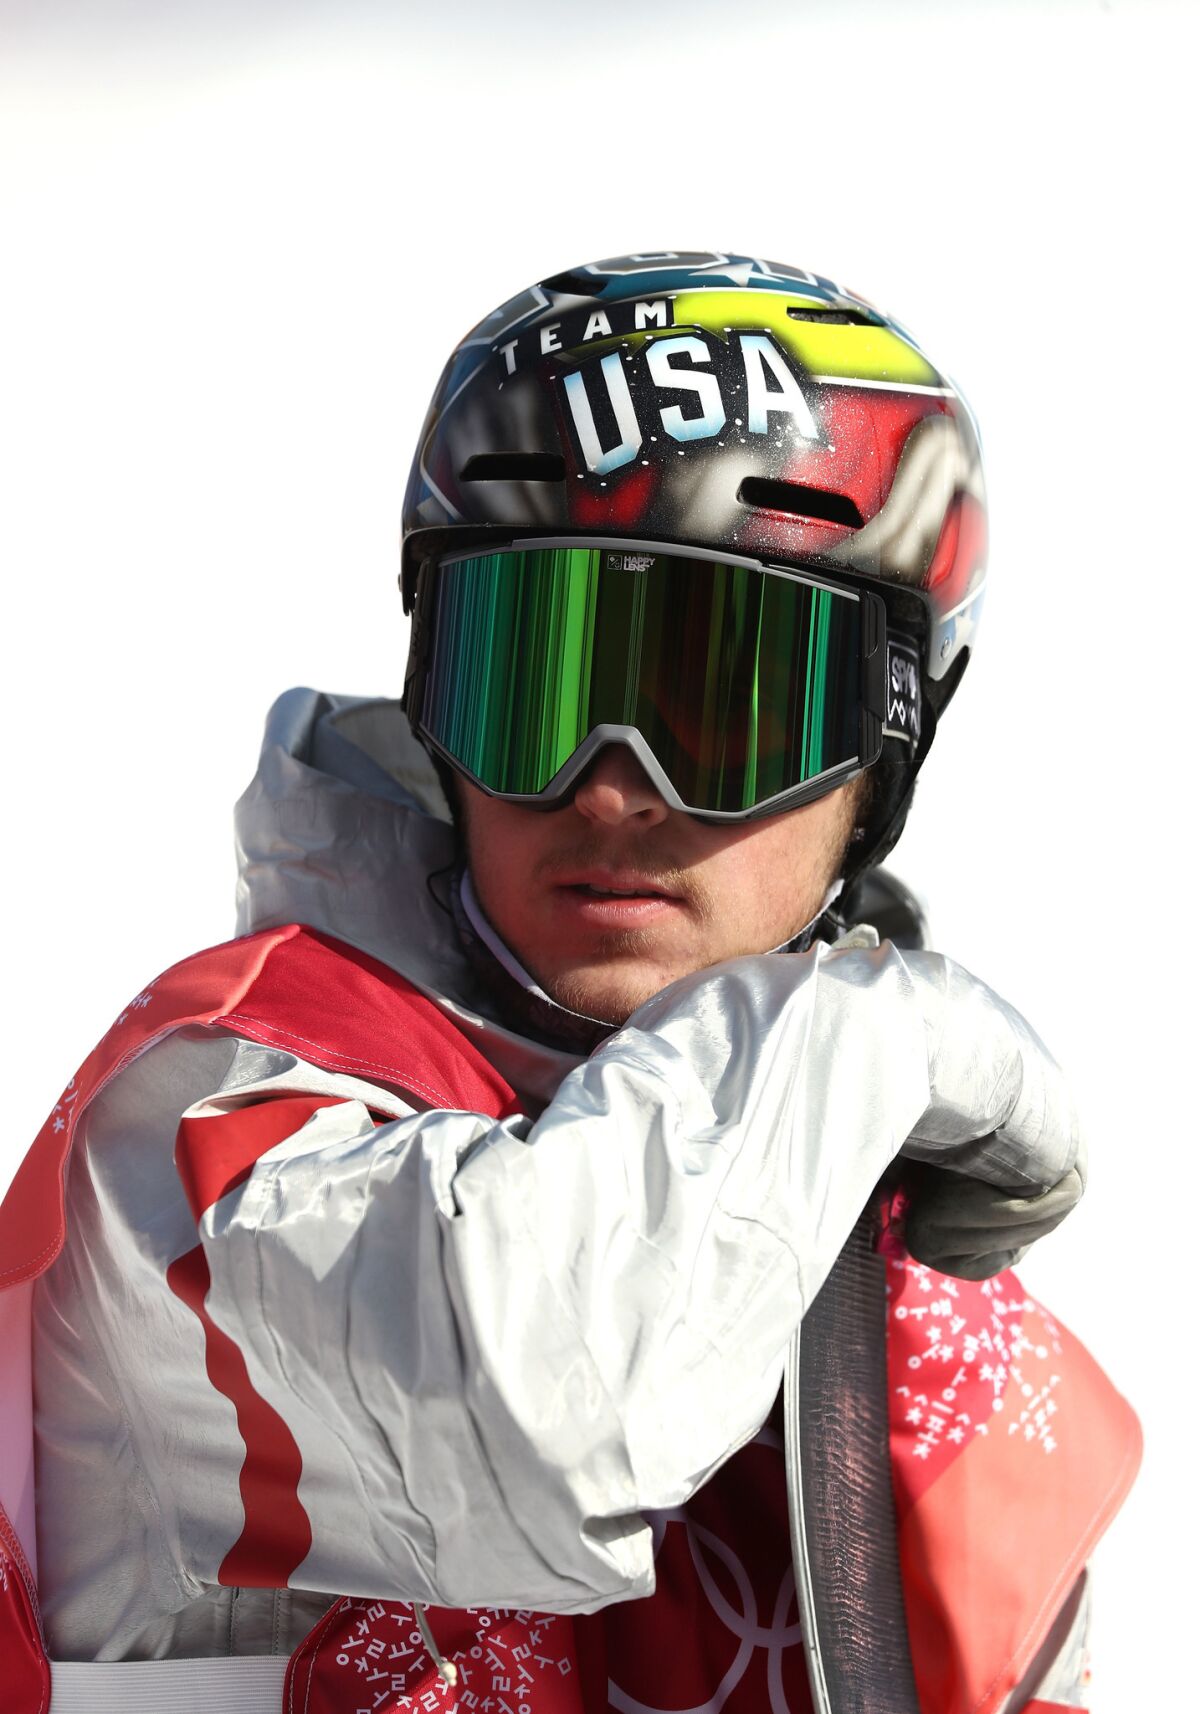 Chris Corning of the United States after his jump during the men's big air snowboard qualification.